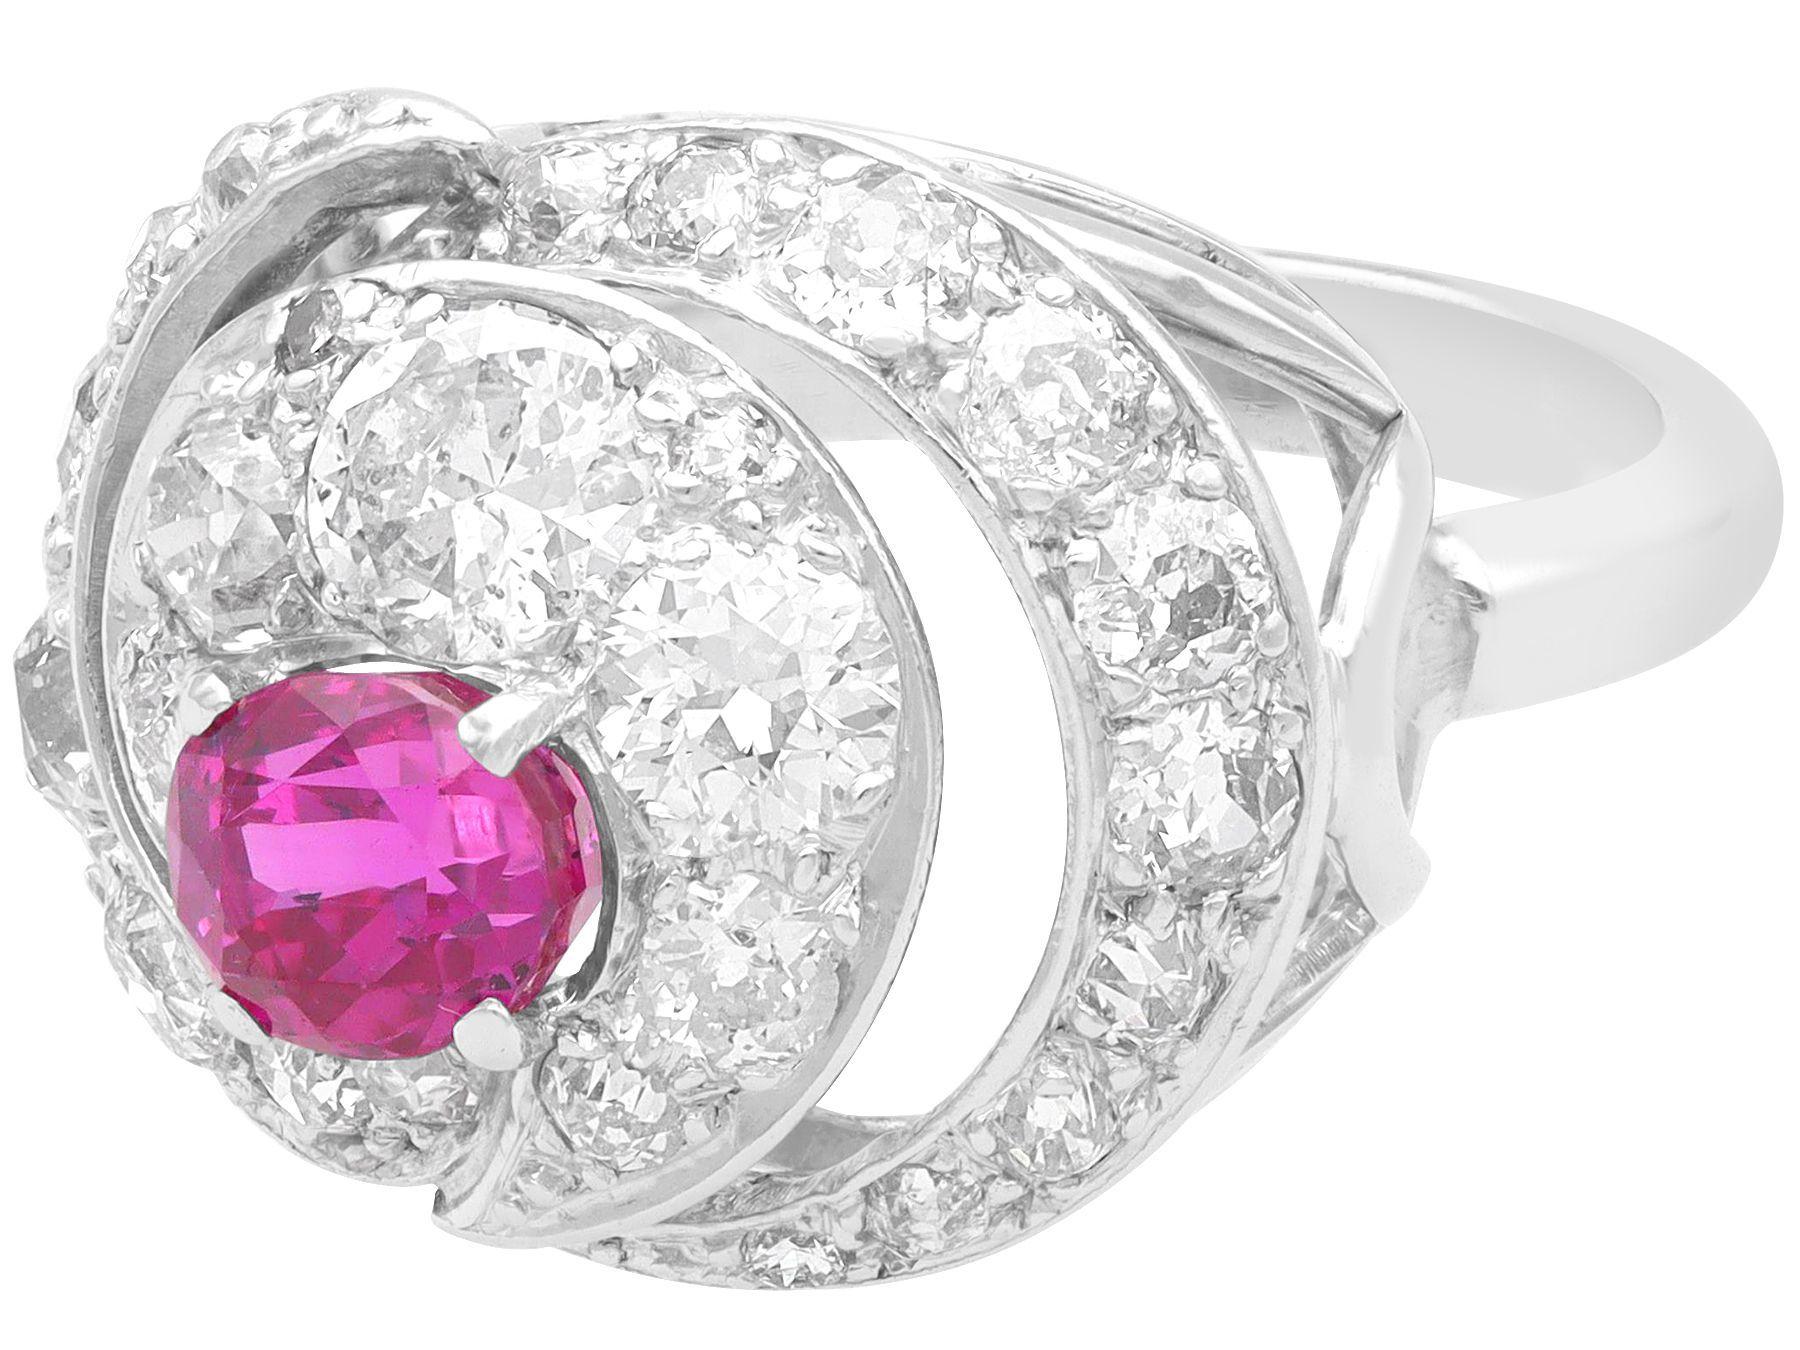 Oval Cut 1.22 Carat Pink Sapphire and 2.73 Carat Diamond Ring For Sale